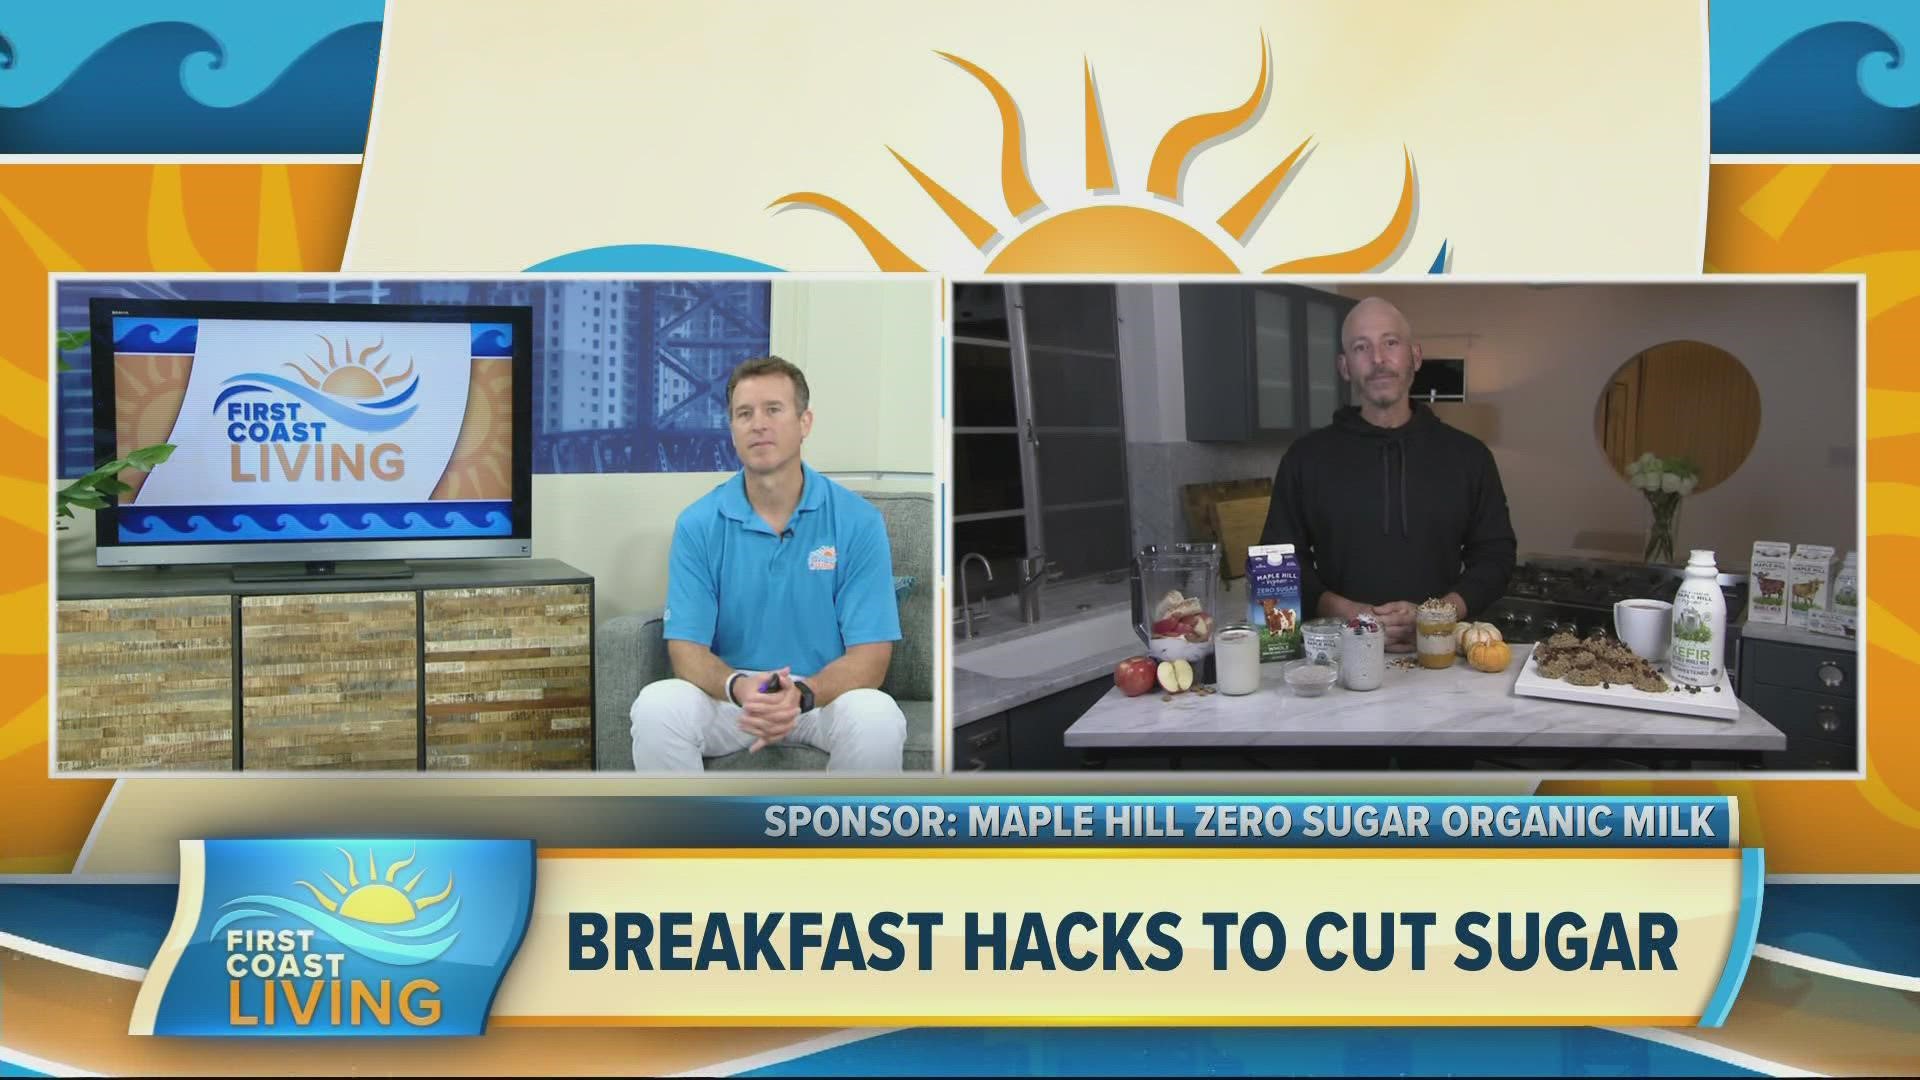 Celebrity fitness trainer and nutrition expert Harley Pasternak helps the family cut sugar especially at breakfast and shares his two favorite exercises.